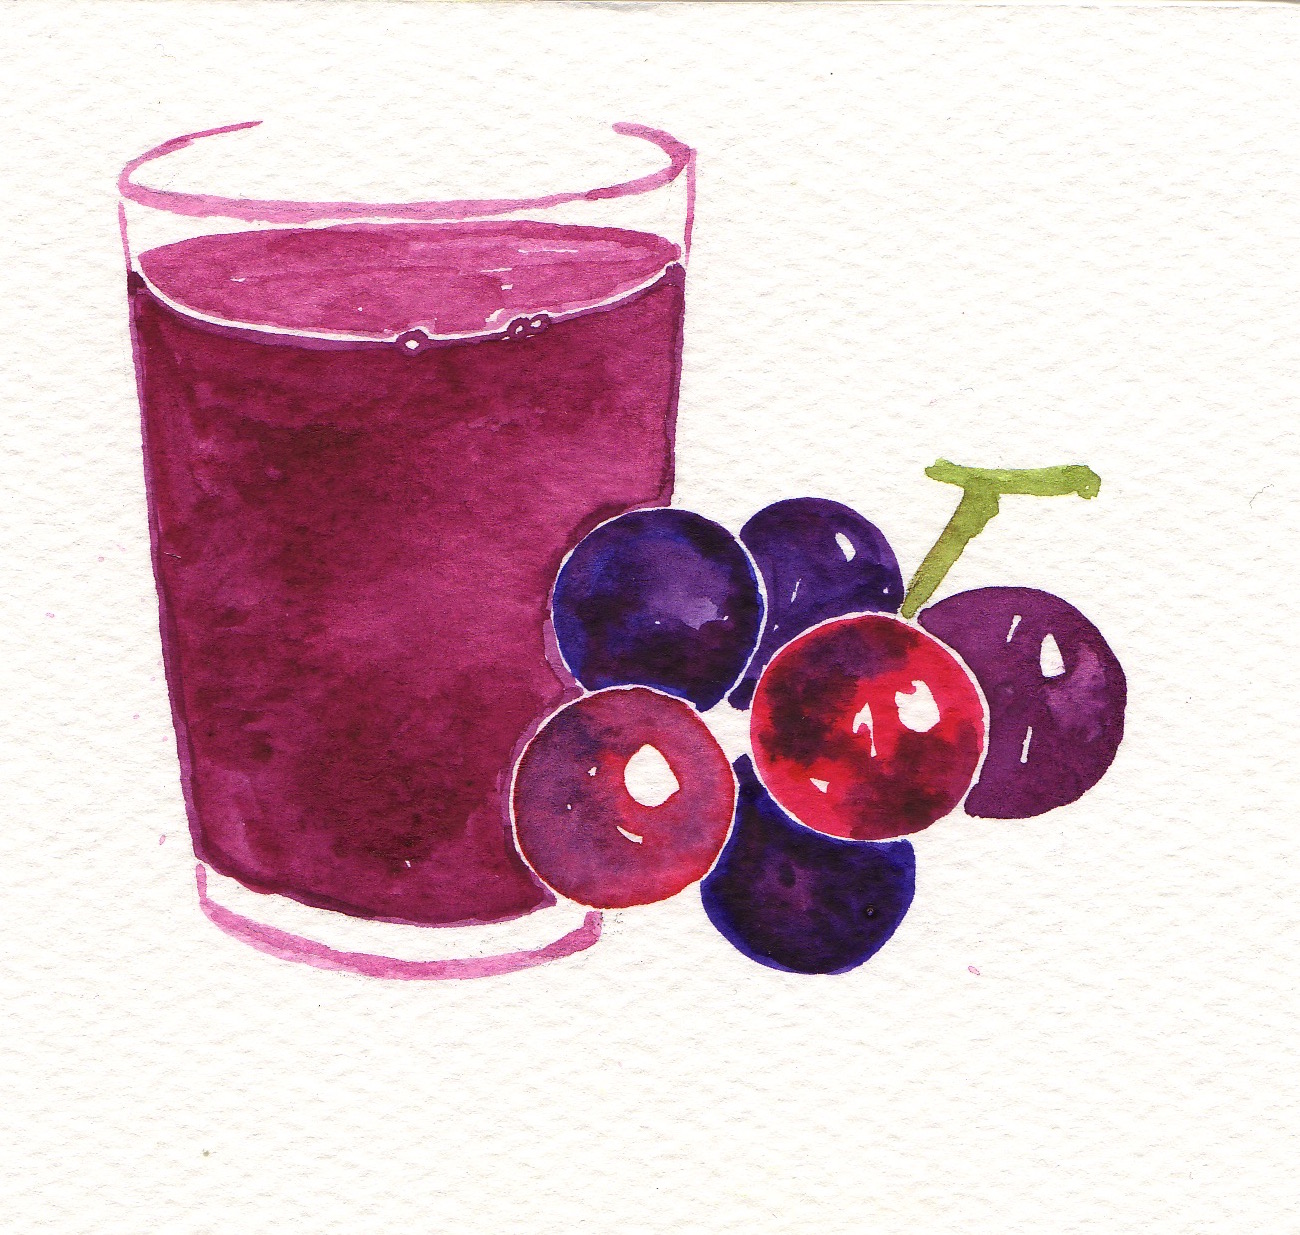 a drawing of a glass of blueberries next to a bunch of berries